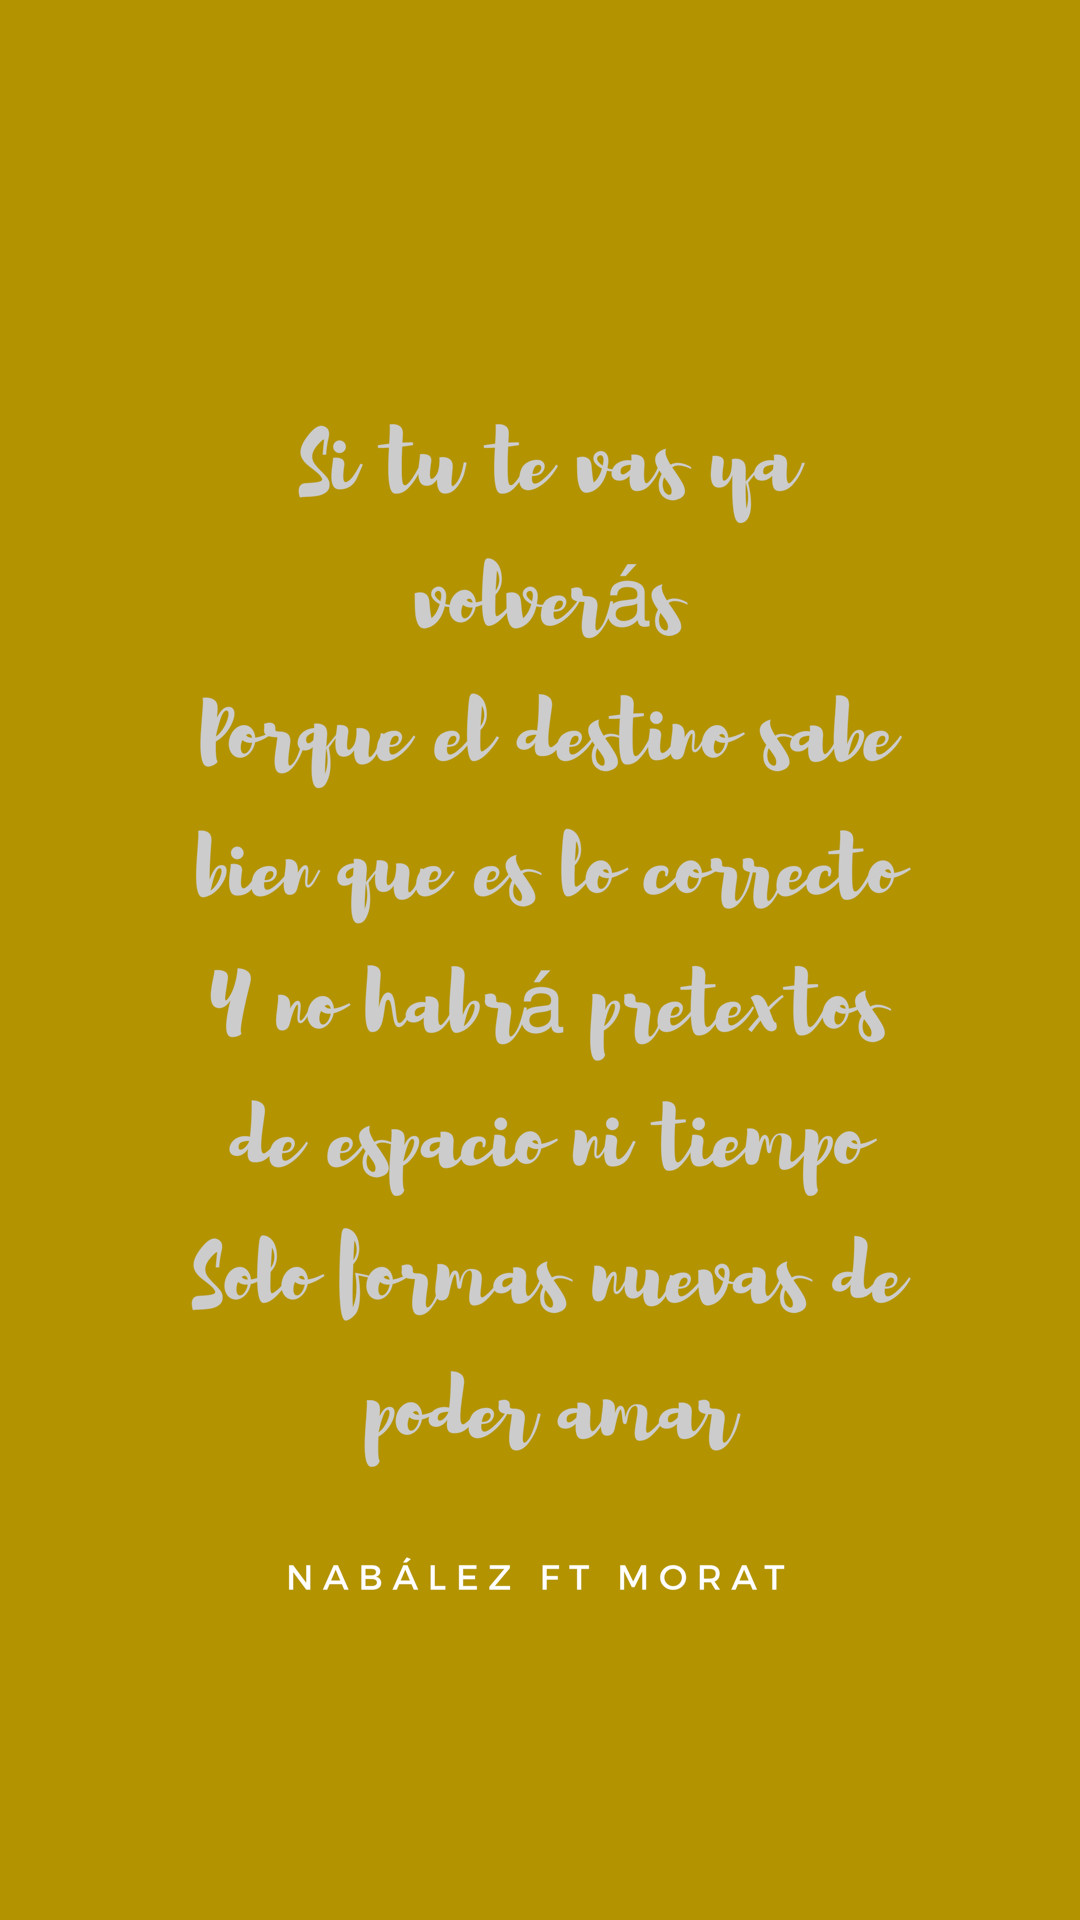 Spanish Wallpapers Sayings (68+ images)